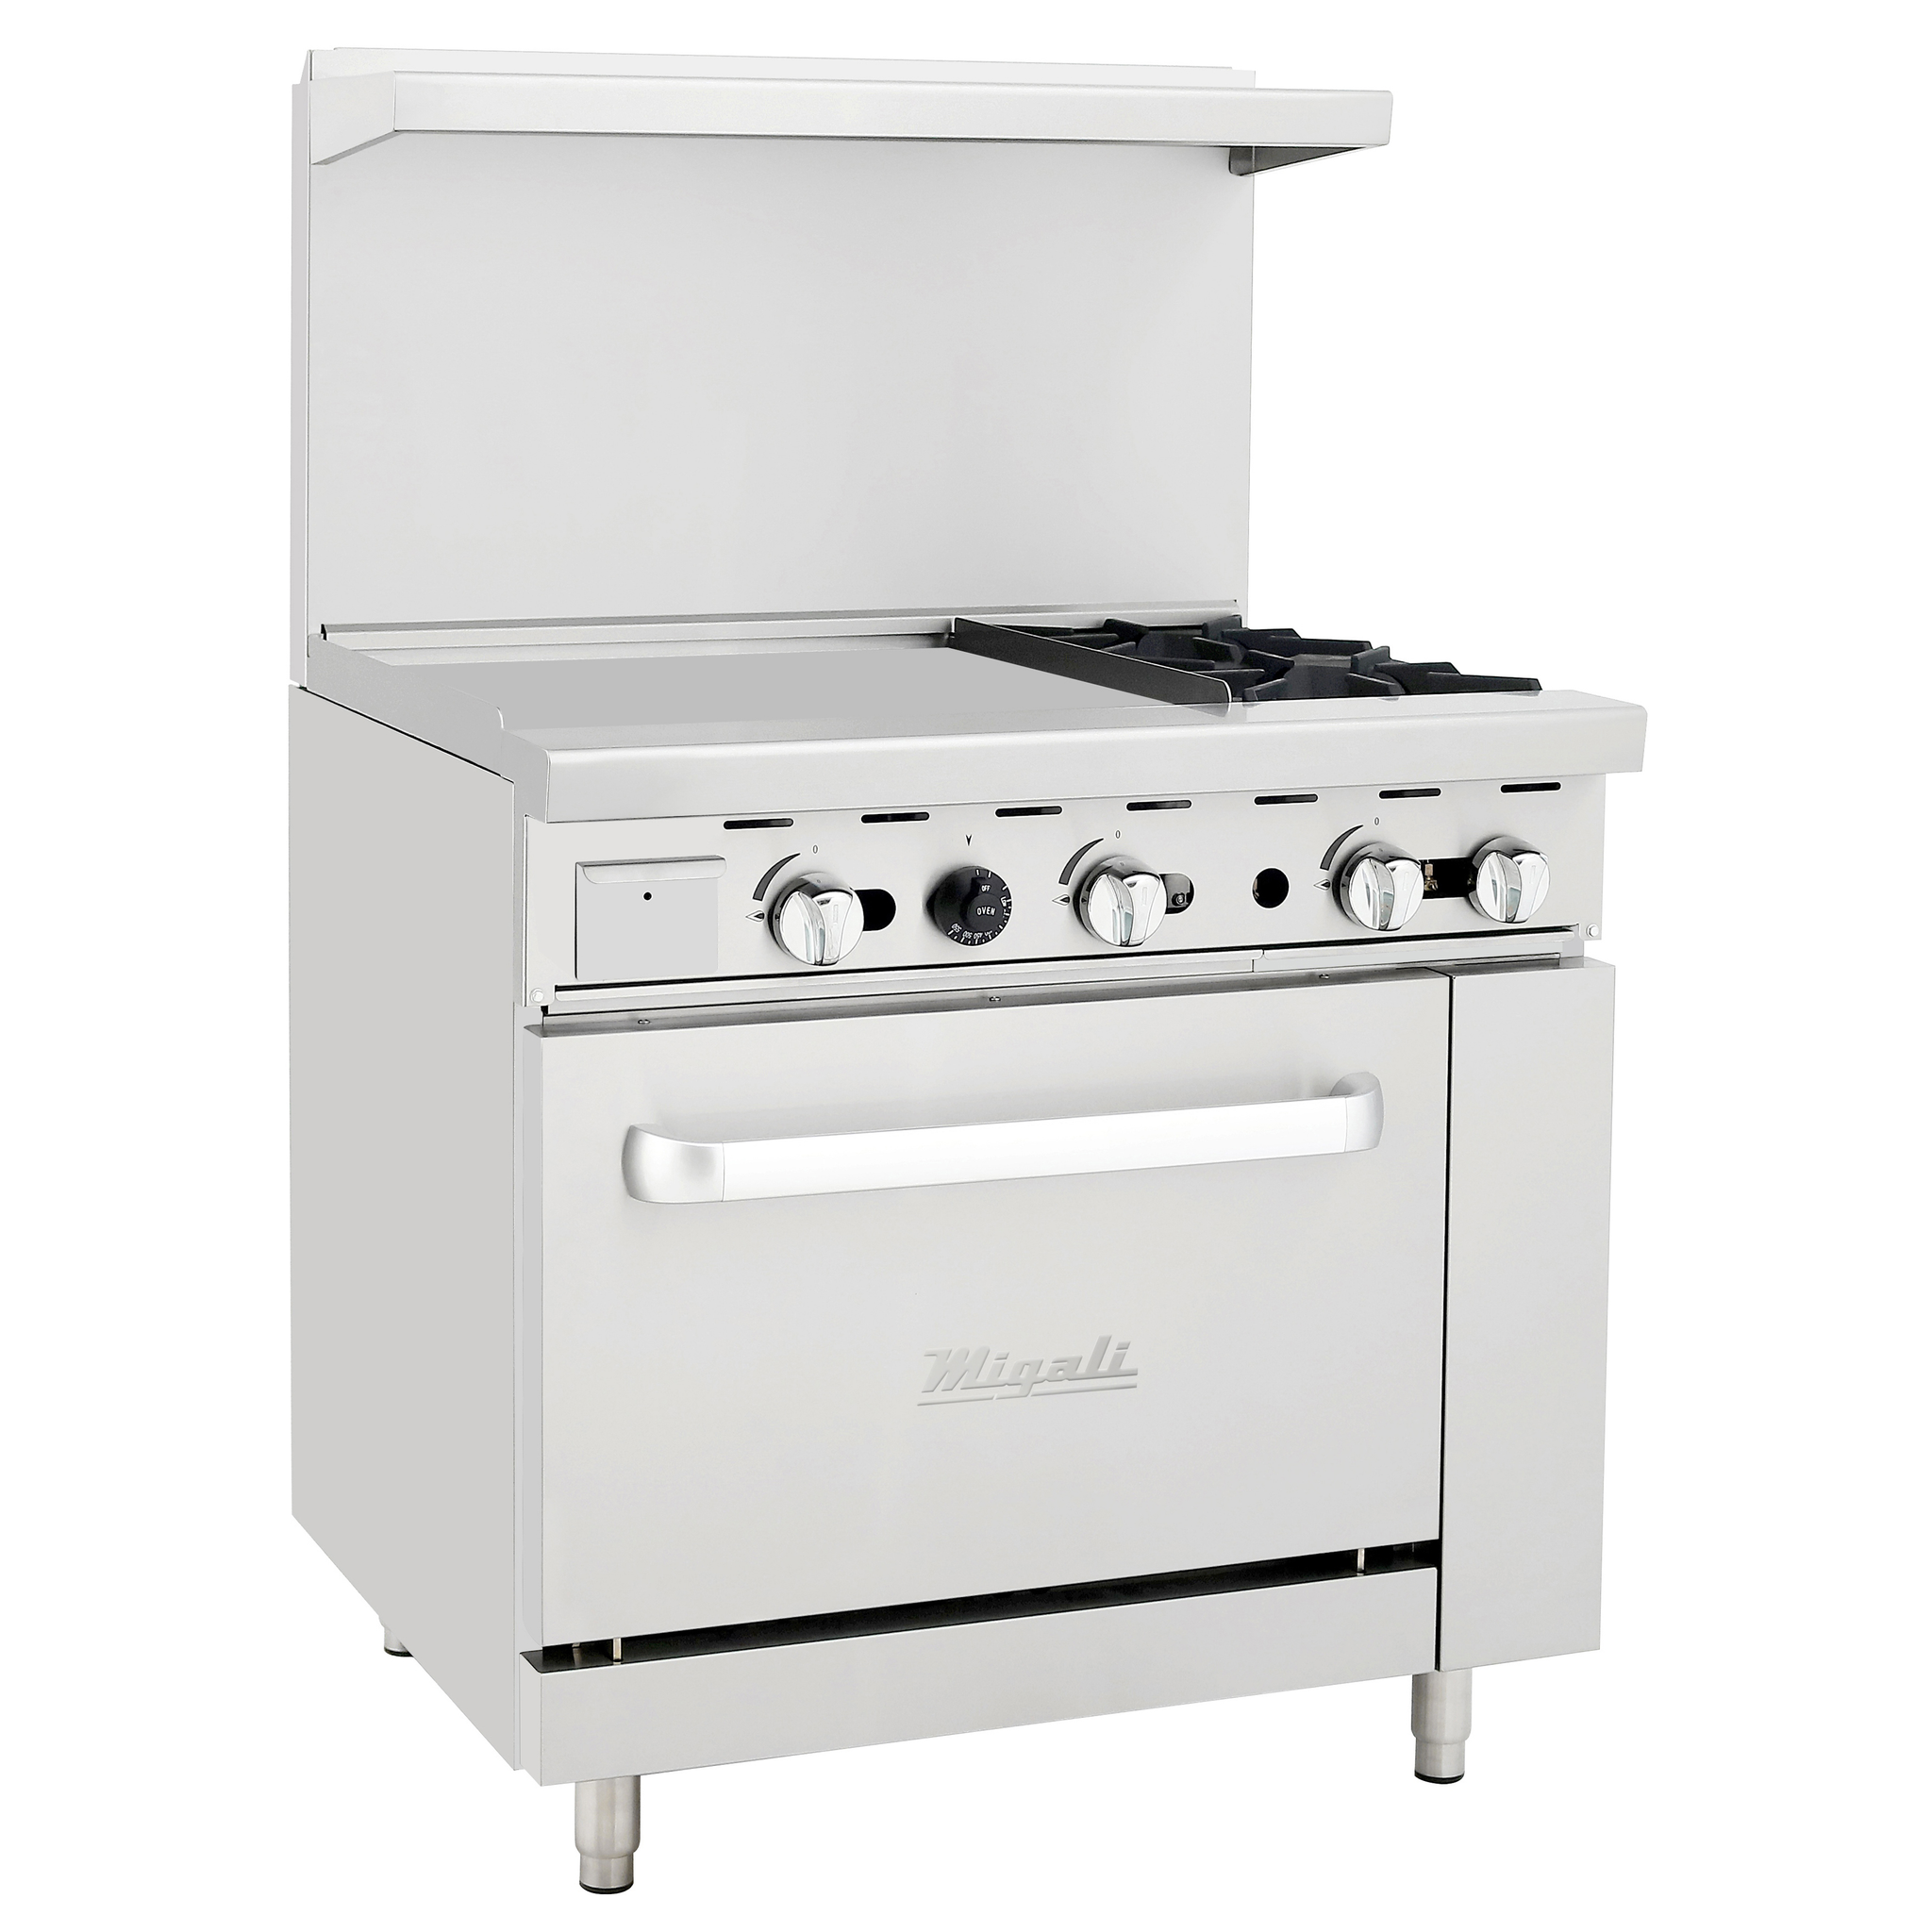 Migali C-RO2-24GL-NG Competitor Series® Range with Griddle - Natural Gas 36”W, (2) Burners, (1) 24” Griddle, (1) Oven